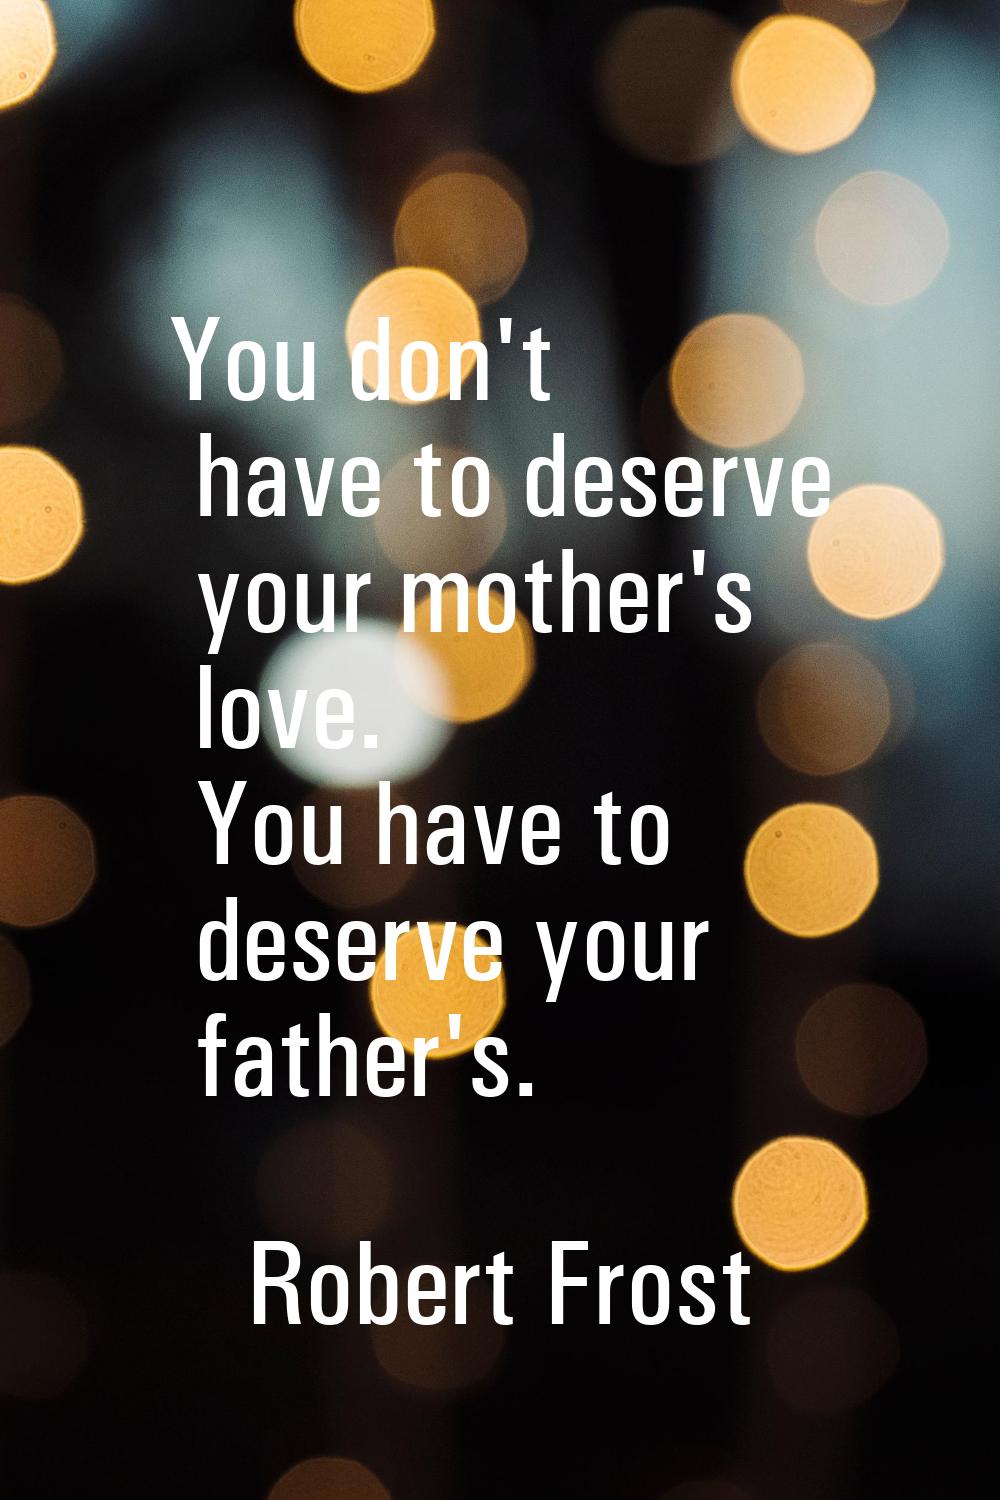 You don't have to deserve your mother's love. You have to deserve your father's.